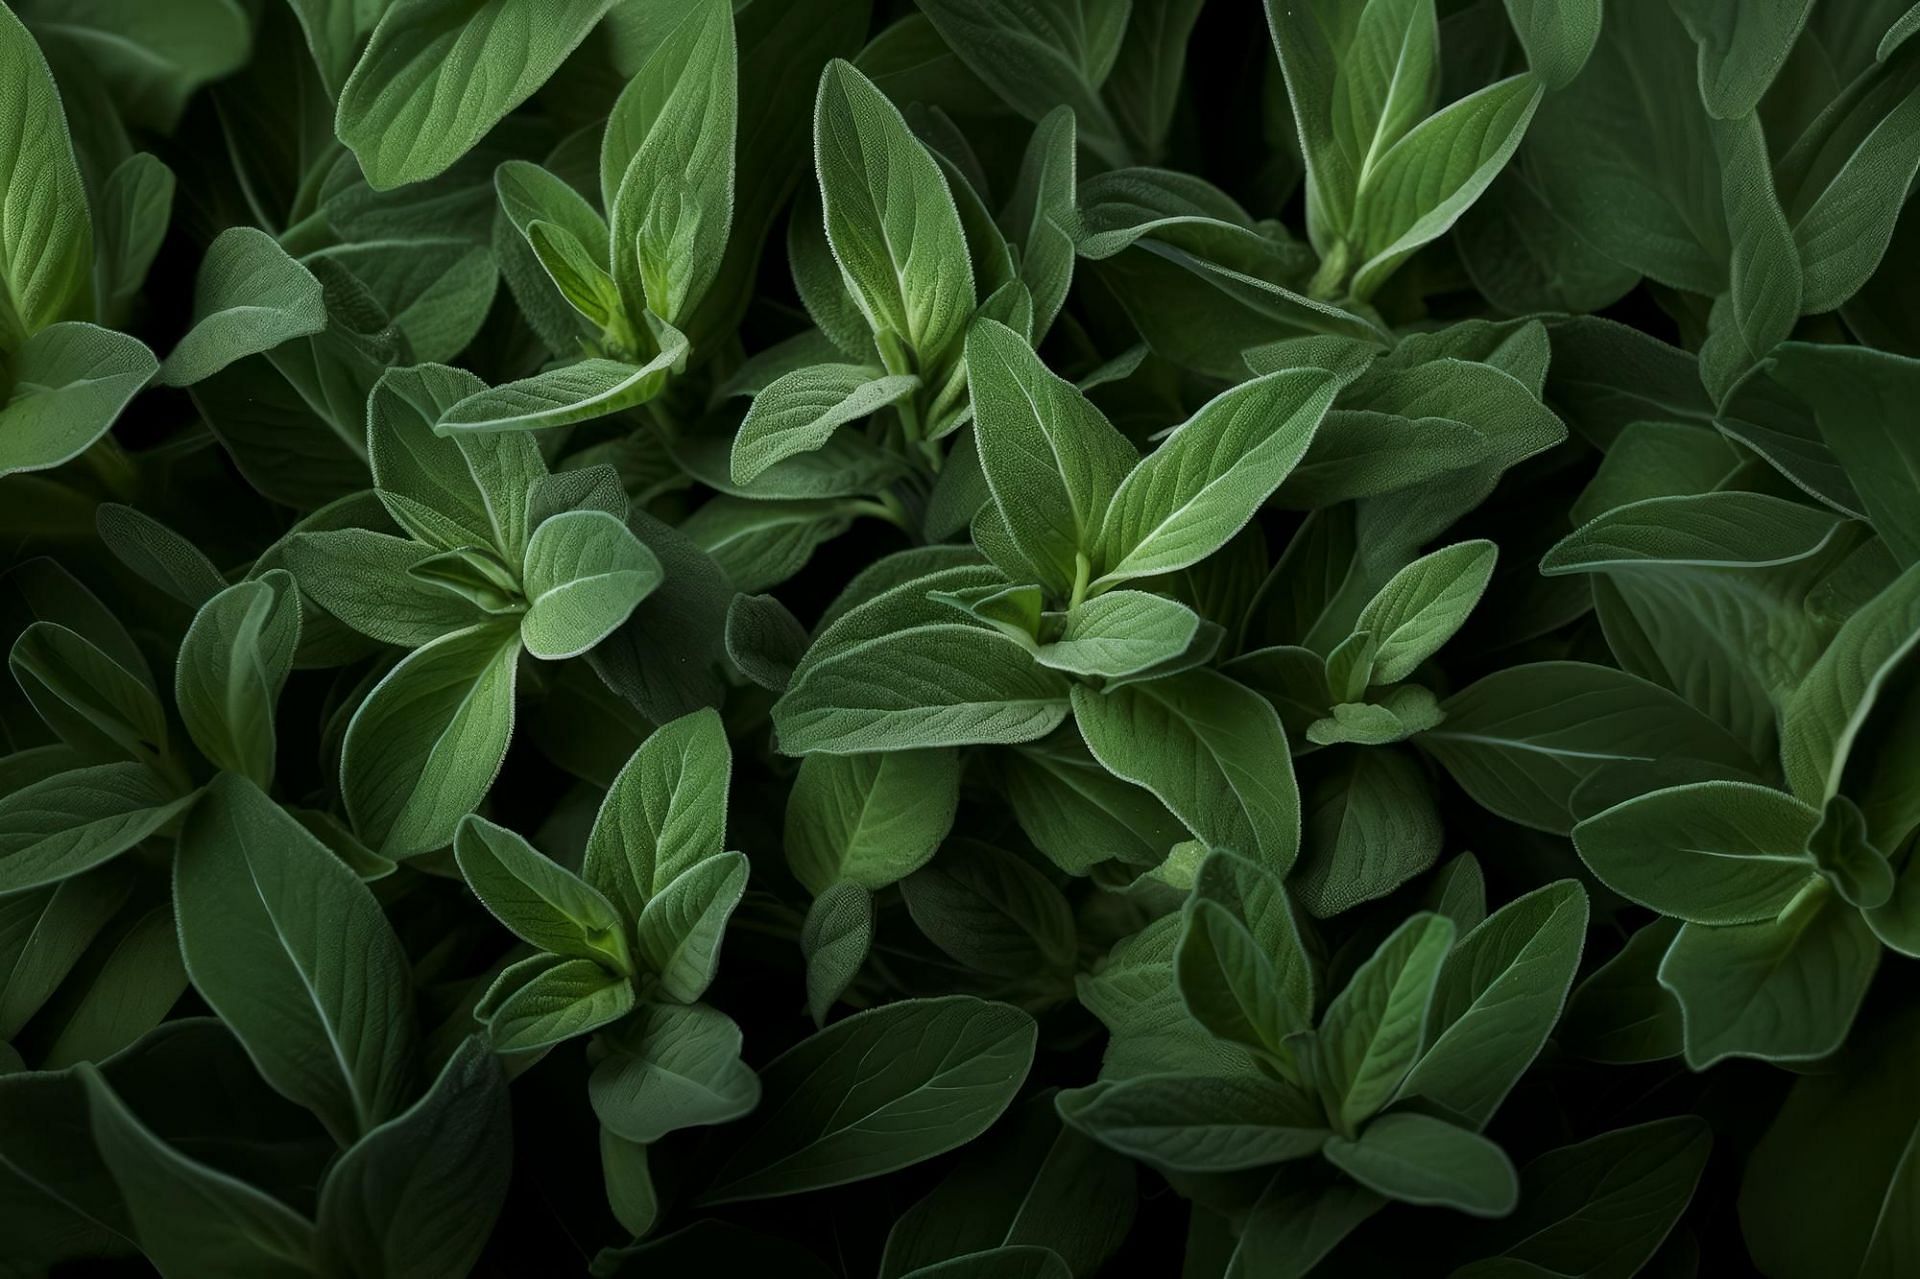 What is a sage herb and is it safe to consume? (Image by Vectonauta on Freepik)